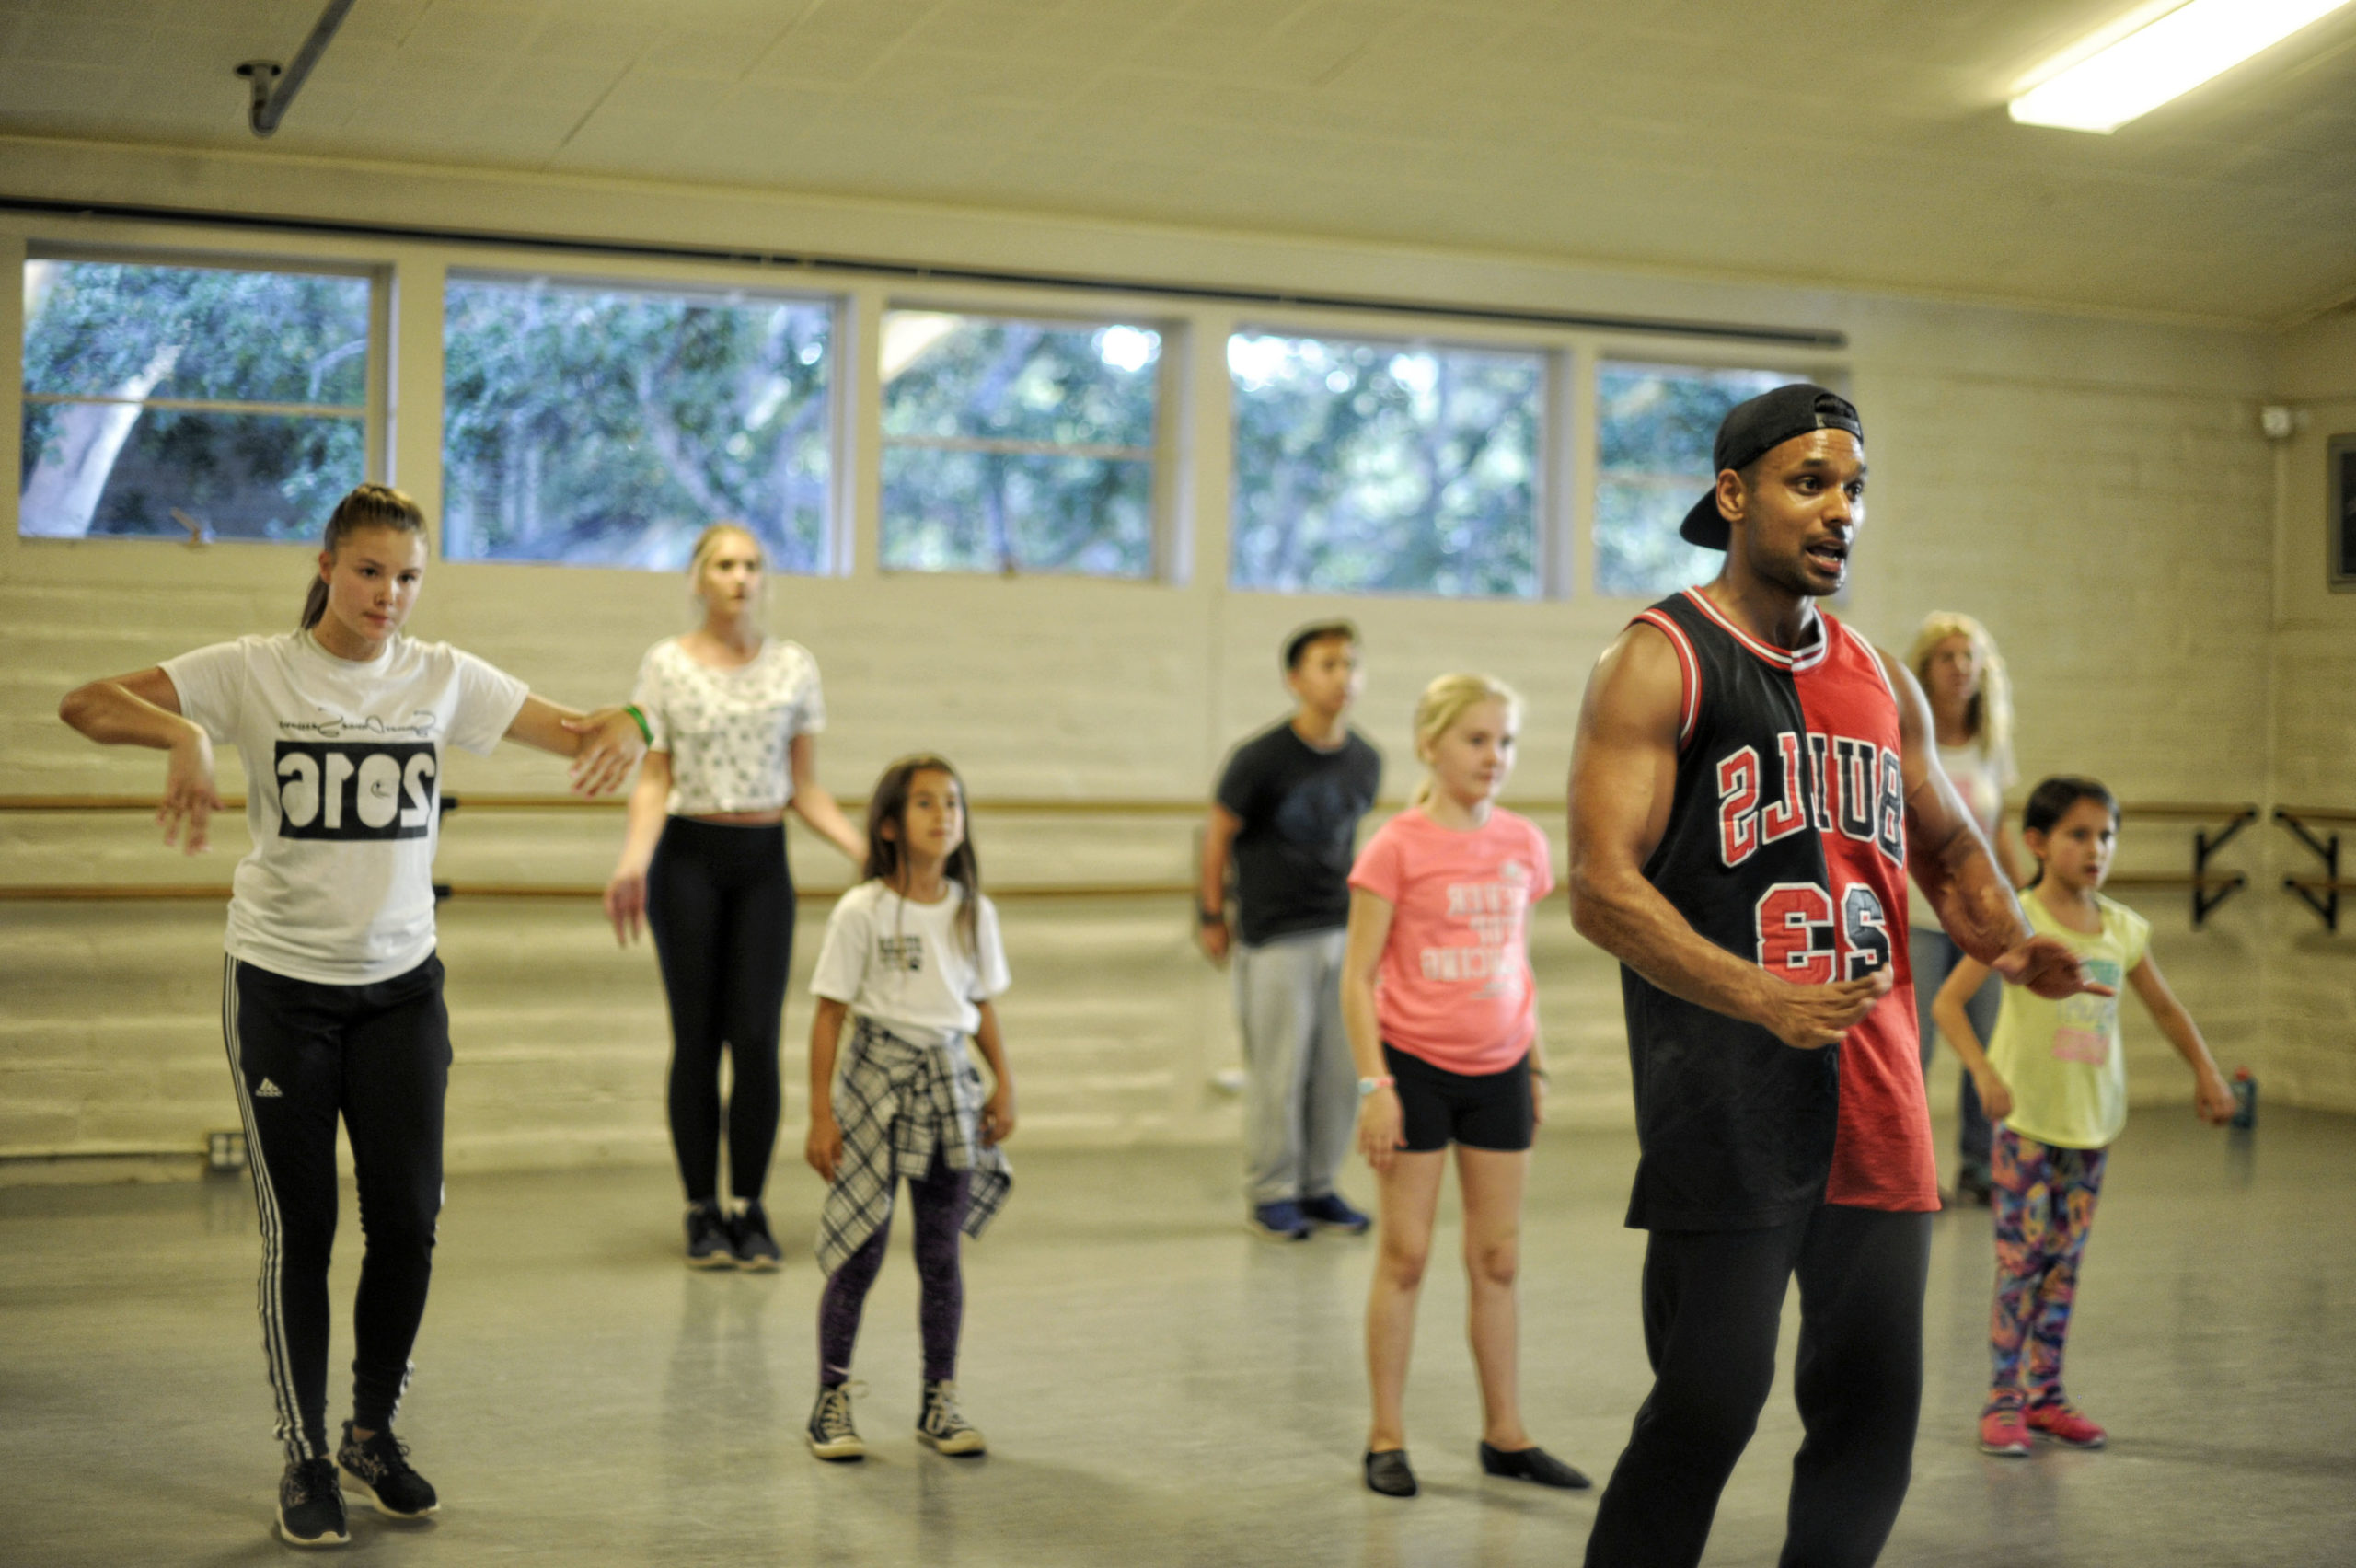 Pavan Thimmaiah, a young Indian-American man, teaches a dance class of a variety of ages. He wears a Bulls tank top and a backwards baseball cap, and students stand behind him in the studio.